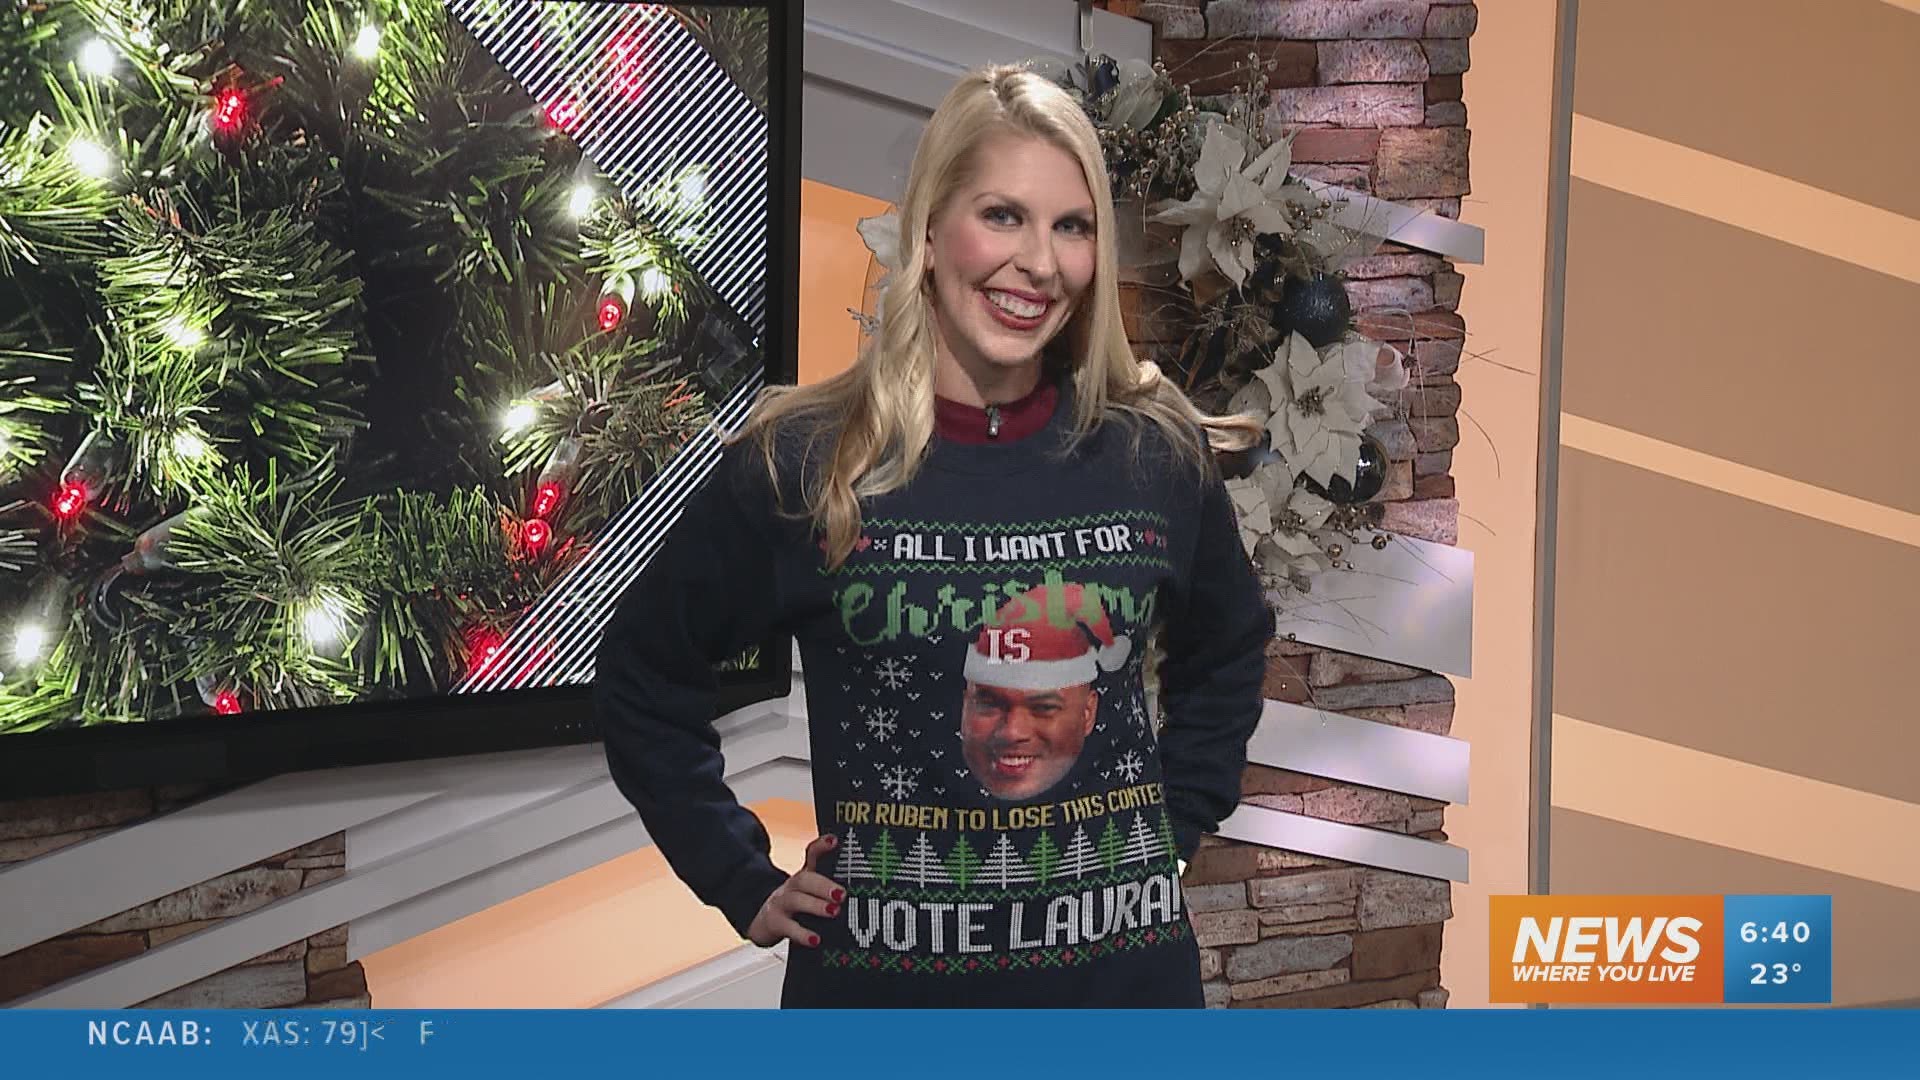 The 5NEWS Morning Team - Ruben Diaz, Laura Simon, and Tyler Moore - need your help deciding who has the "best" ugly Christmas sweater.